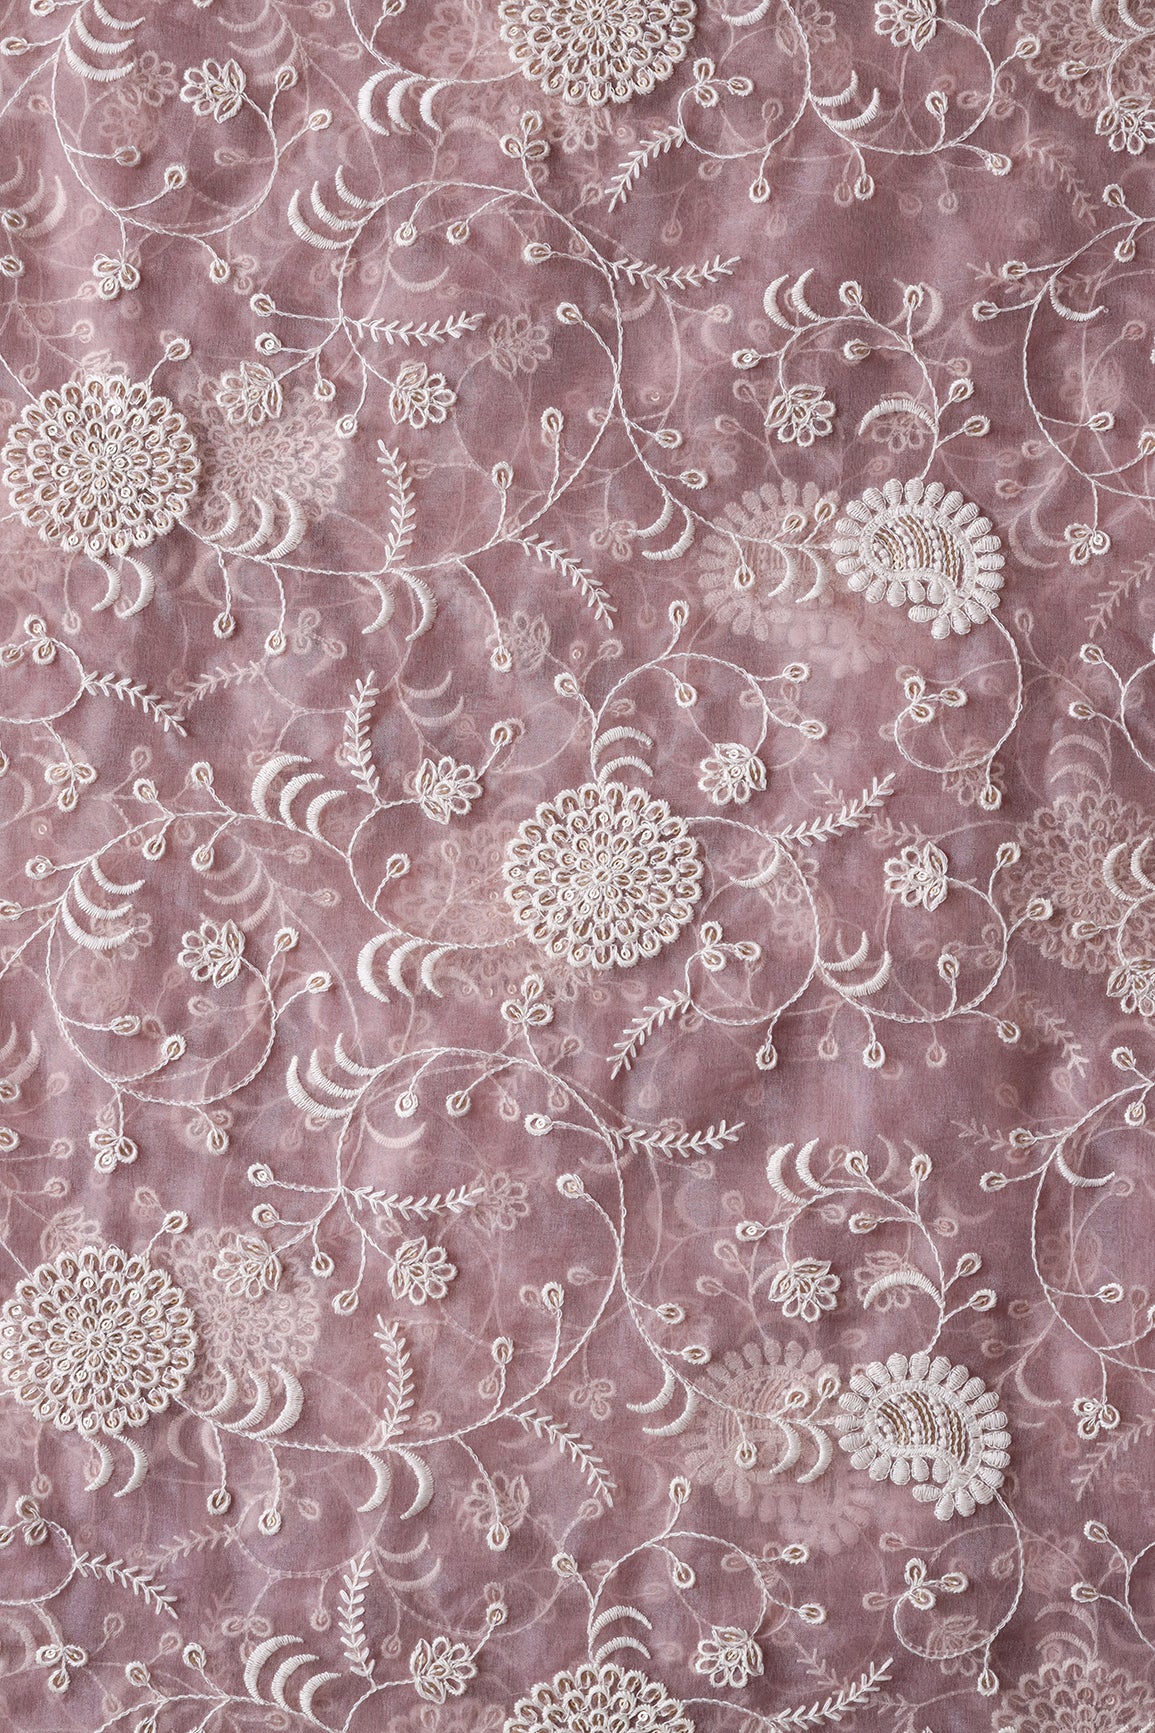 Exclusive Gold Matte Sequins With White Thread Floral Embroidery On Mauve Organza Fabric